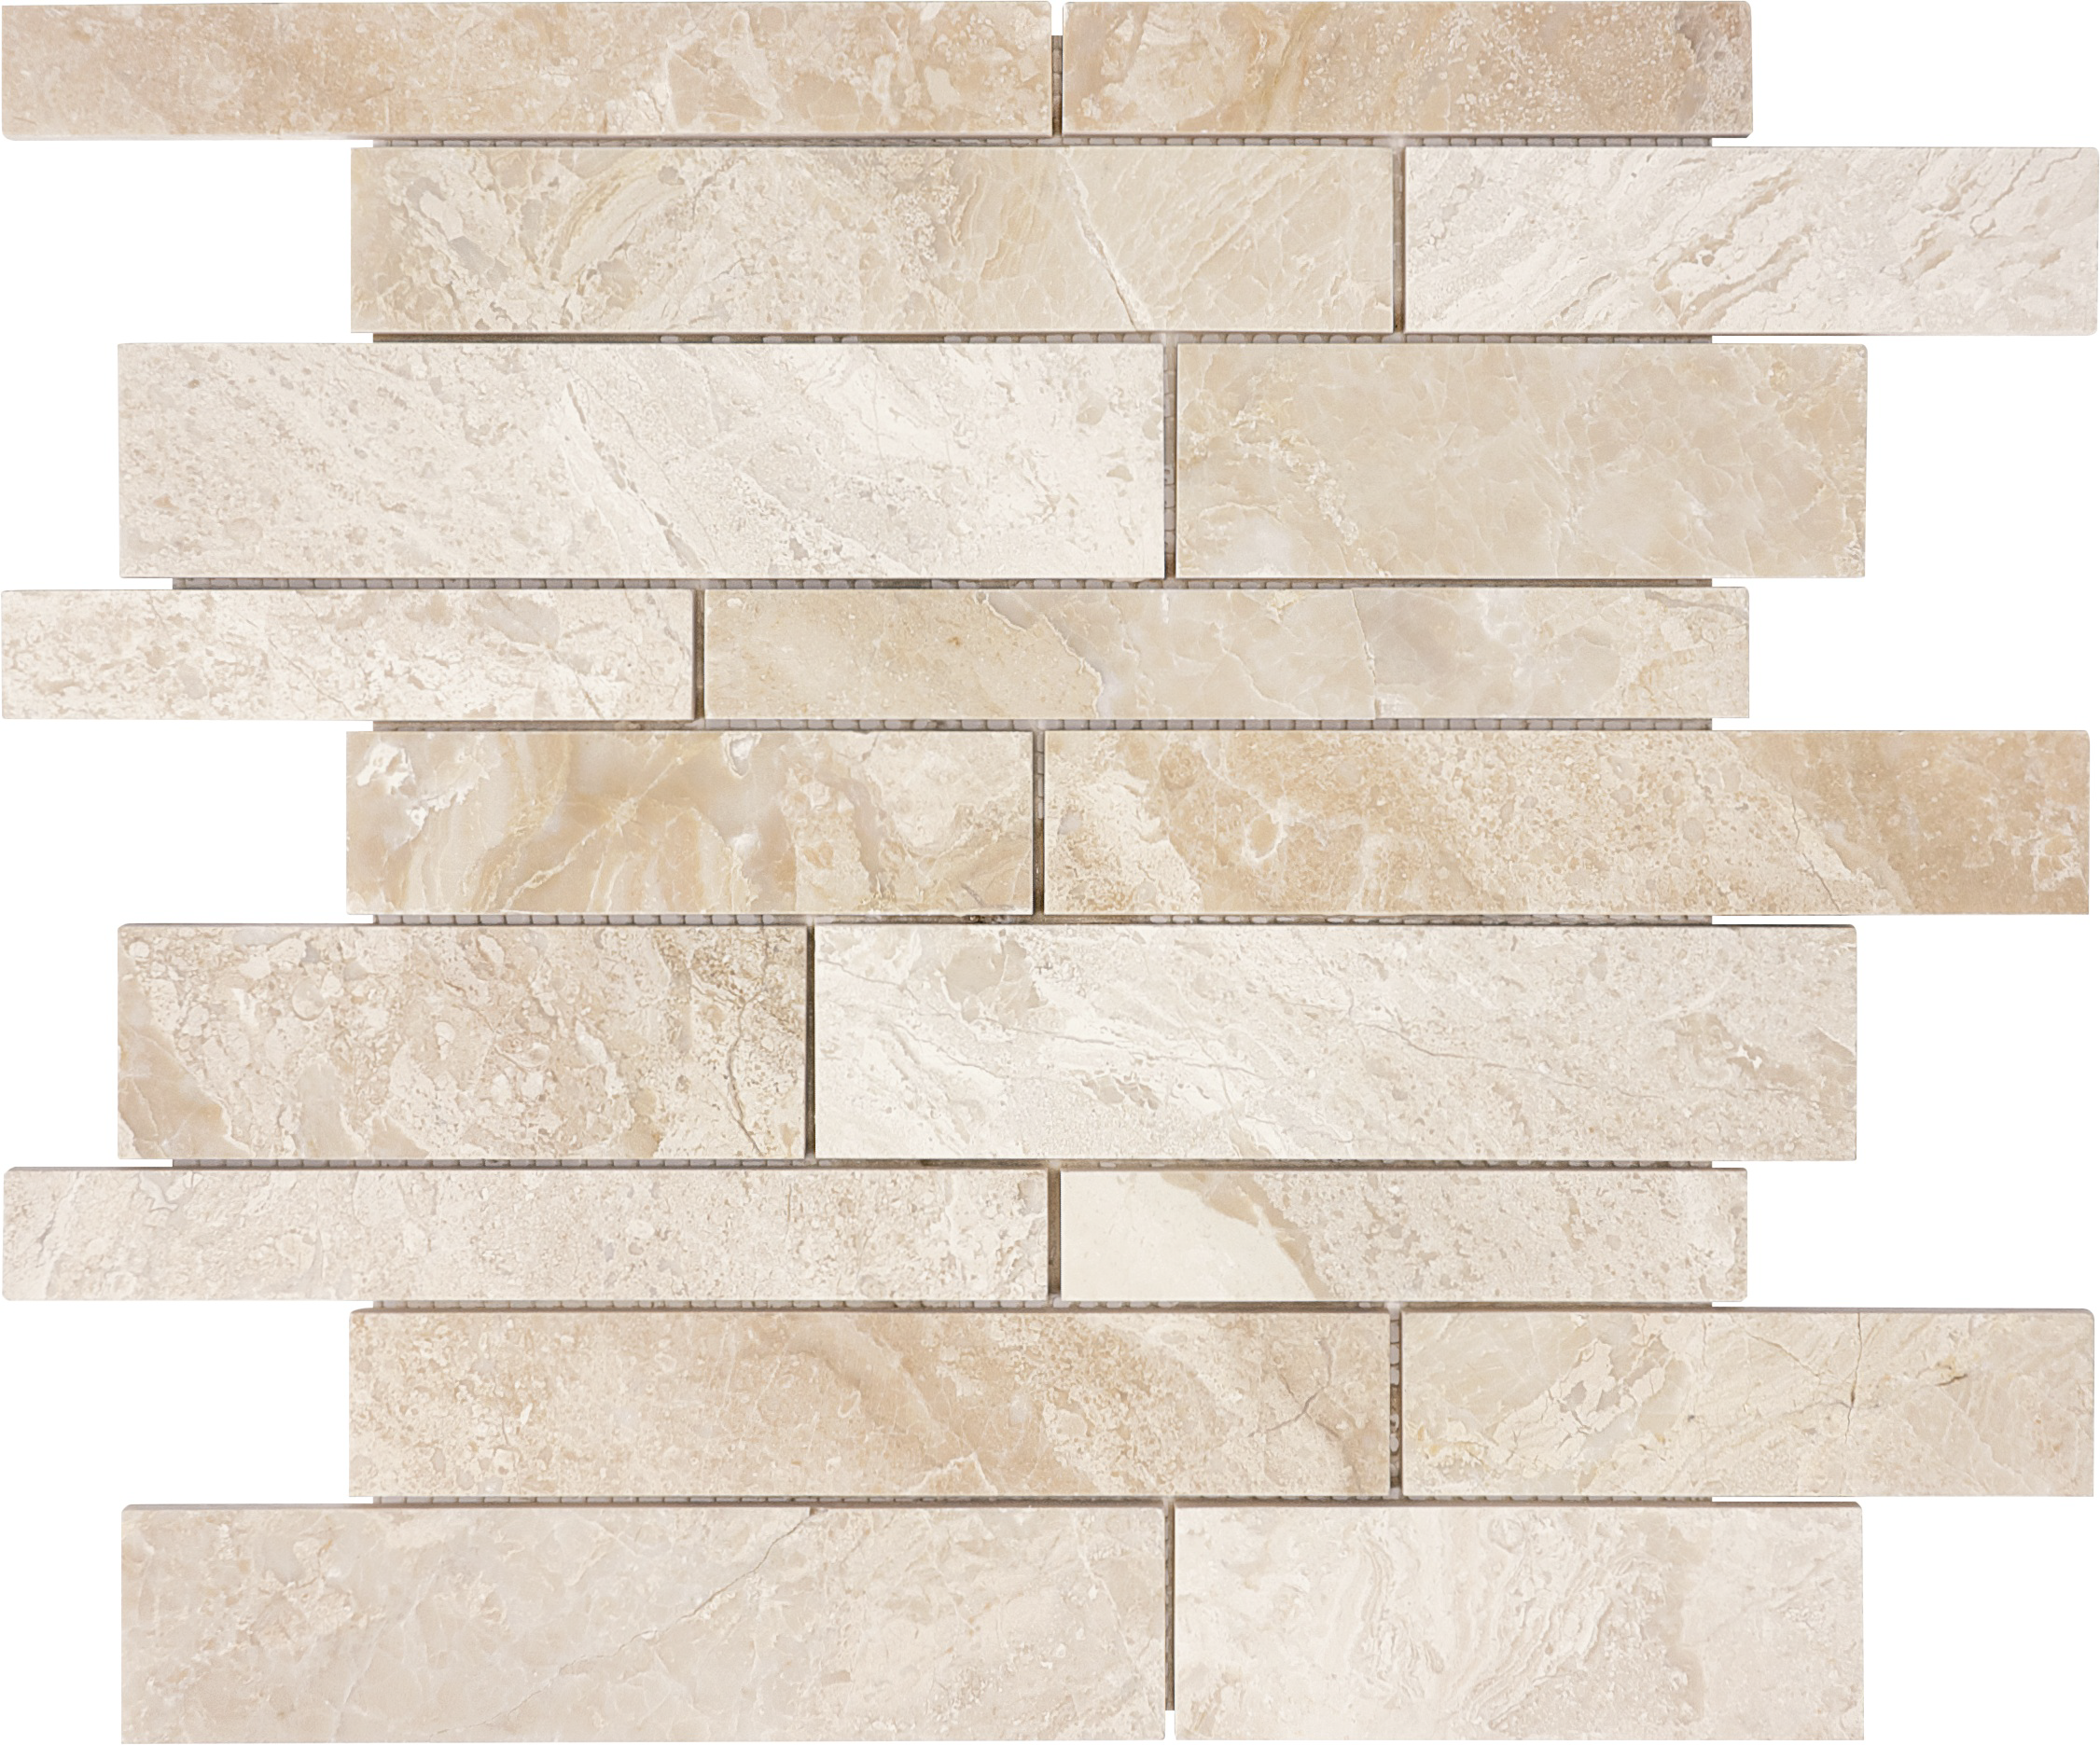 marble random strip pattern natural stone mosaic from impero reale anatolia collection distributed by surface group international honed finish straight edge edge mesh shape